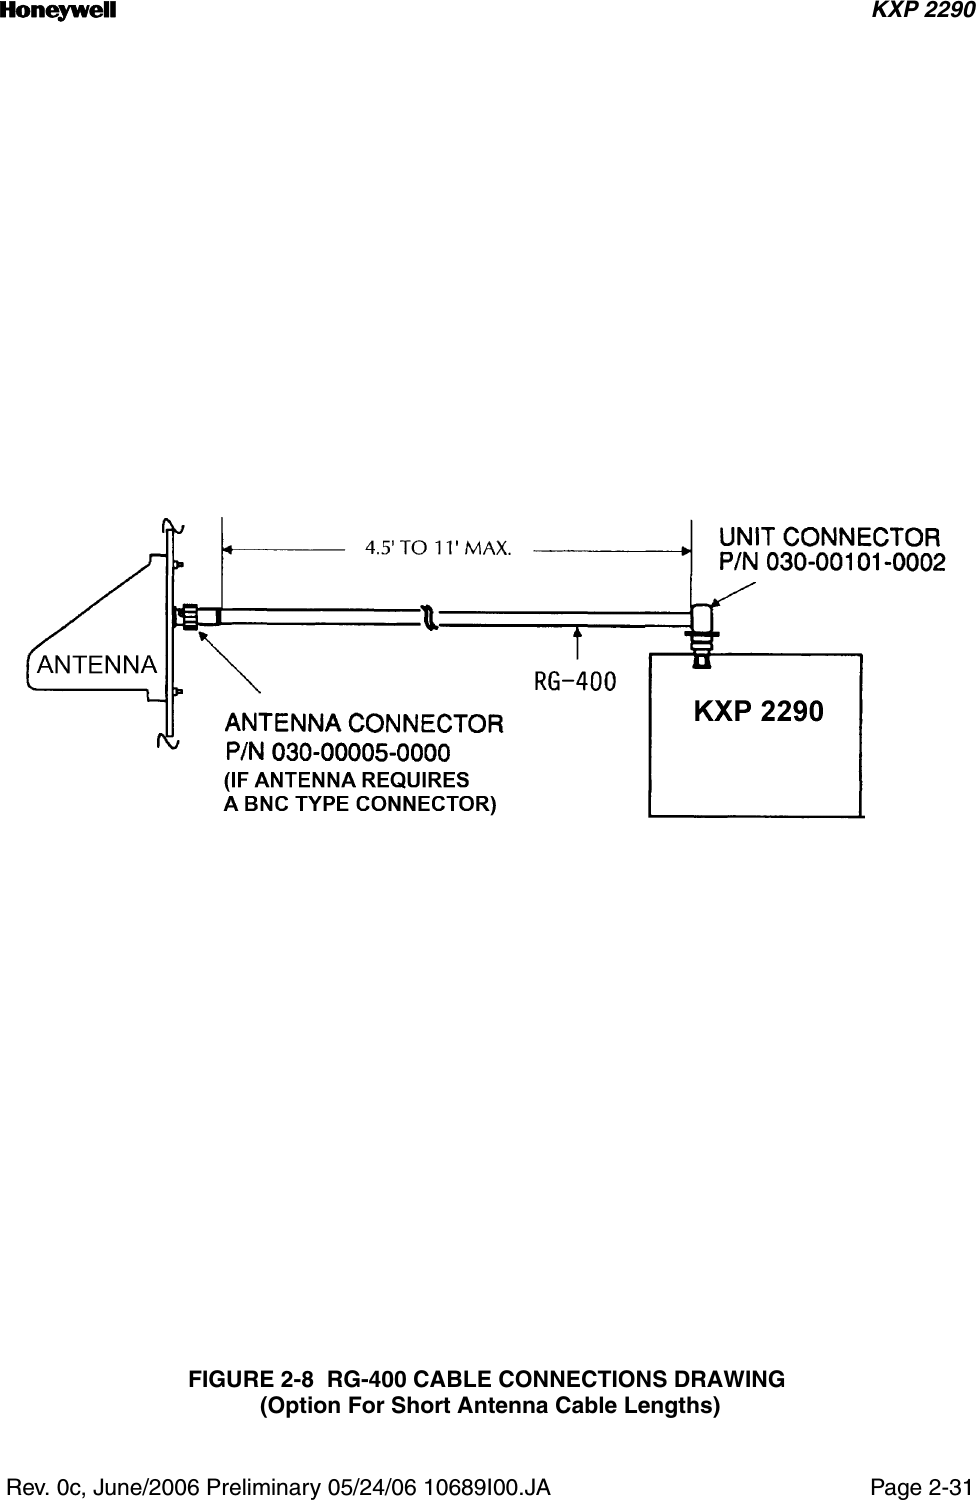 n KXP 2290 Rev. 0c, June/2006 Preliminary 05/24/06 10689I00.JA Page 2-31FIGURE 2-8  RG-400 CABLE CONNECTIONS DRAWING (Option For Short Antenna Cable Lengths)